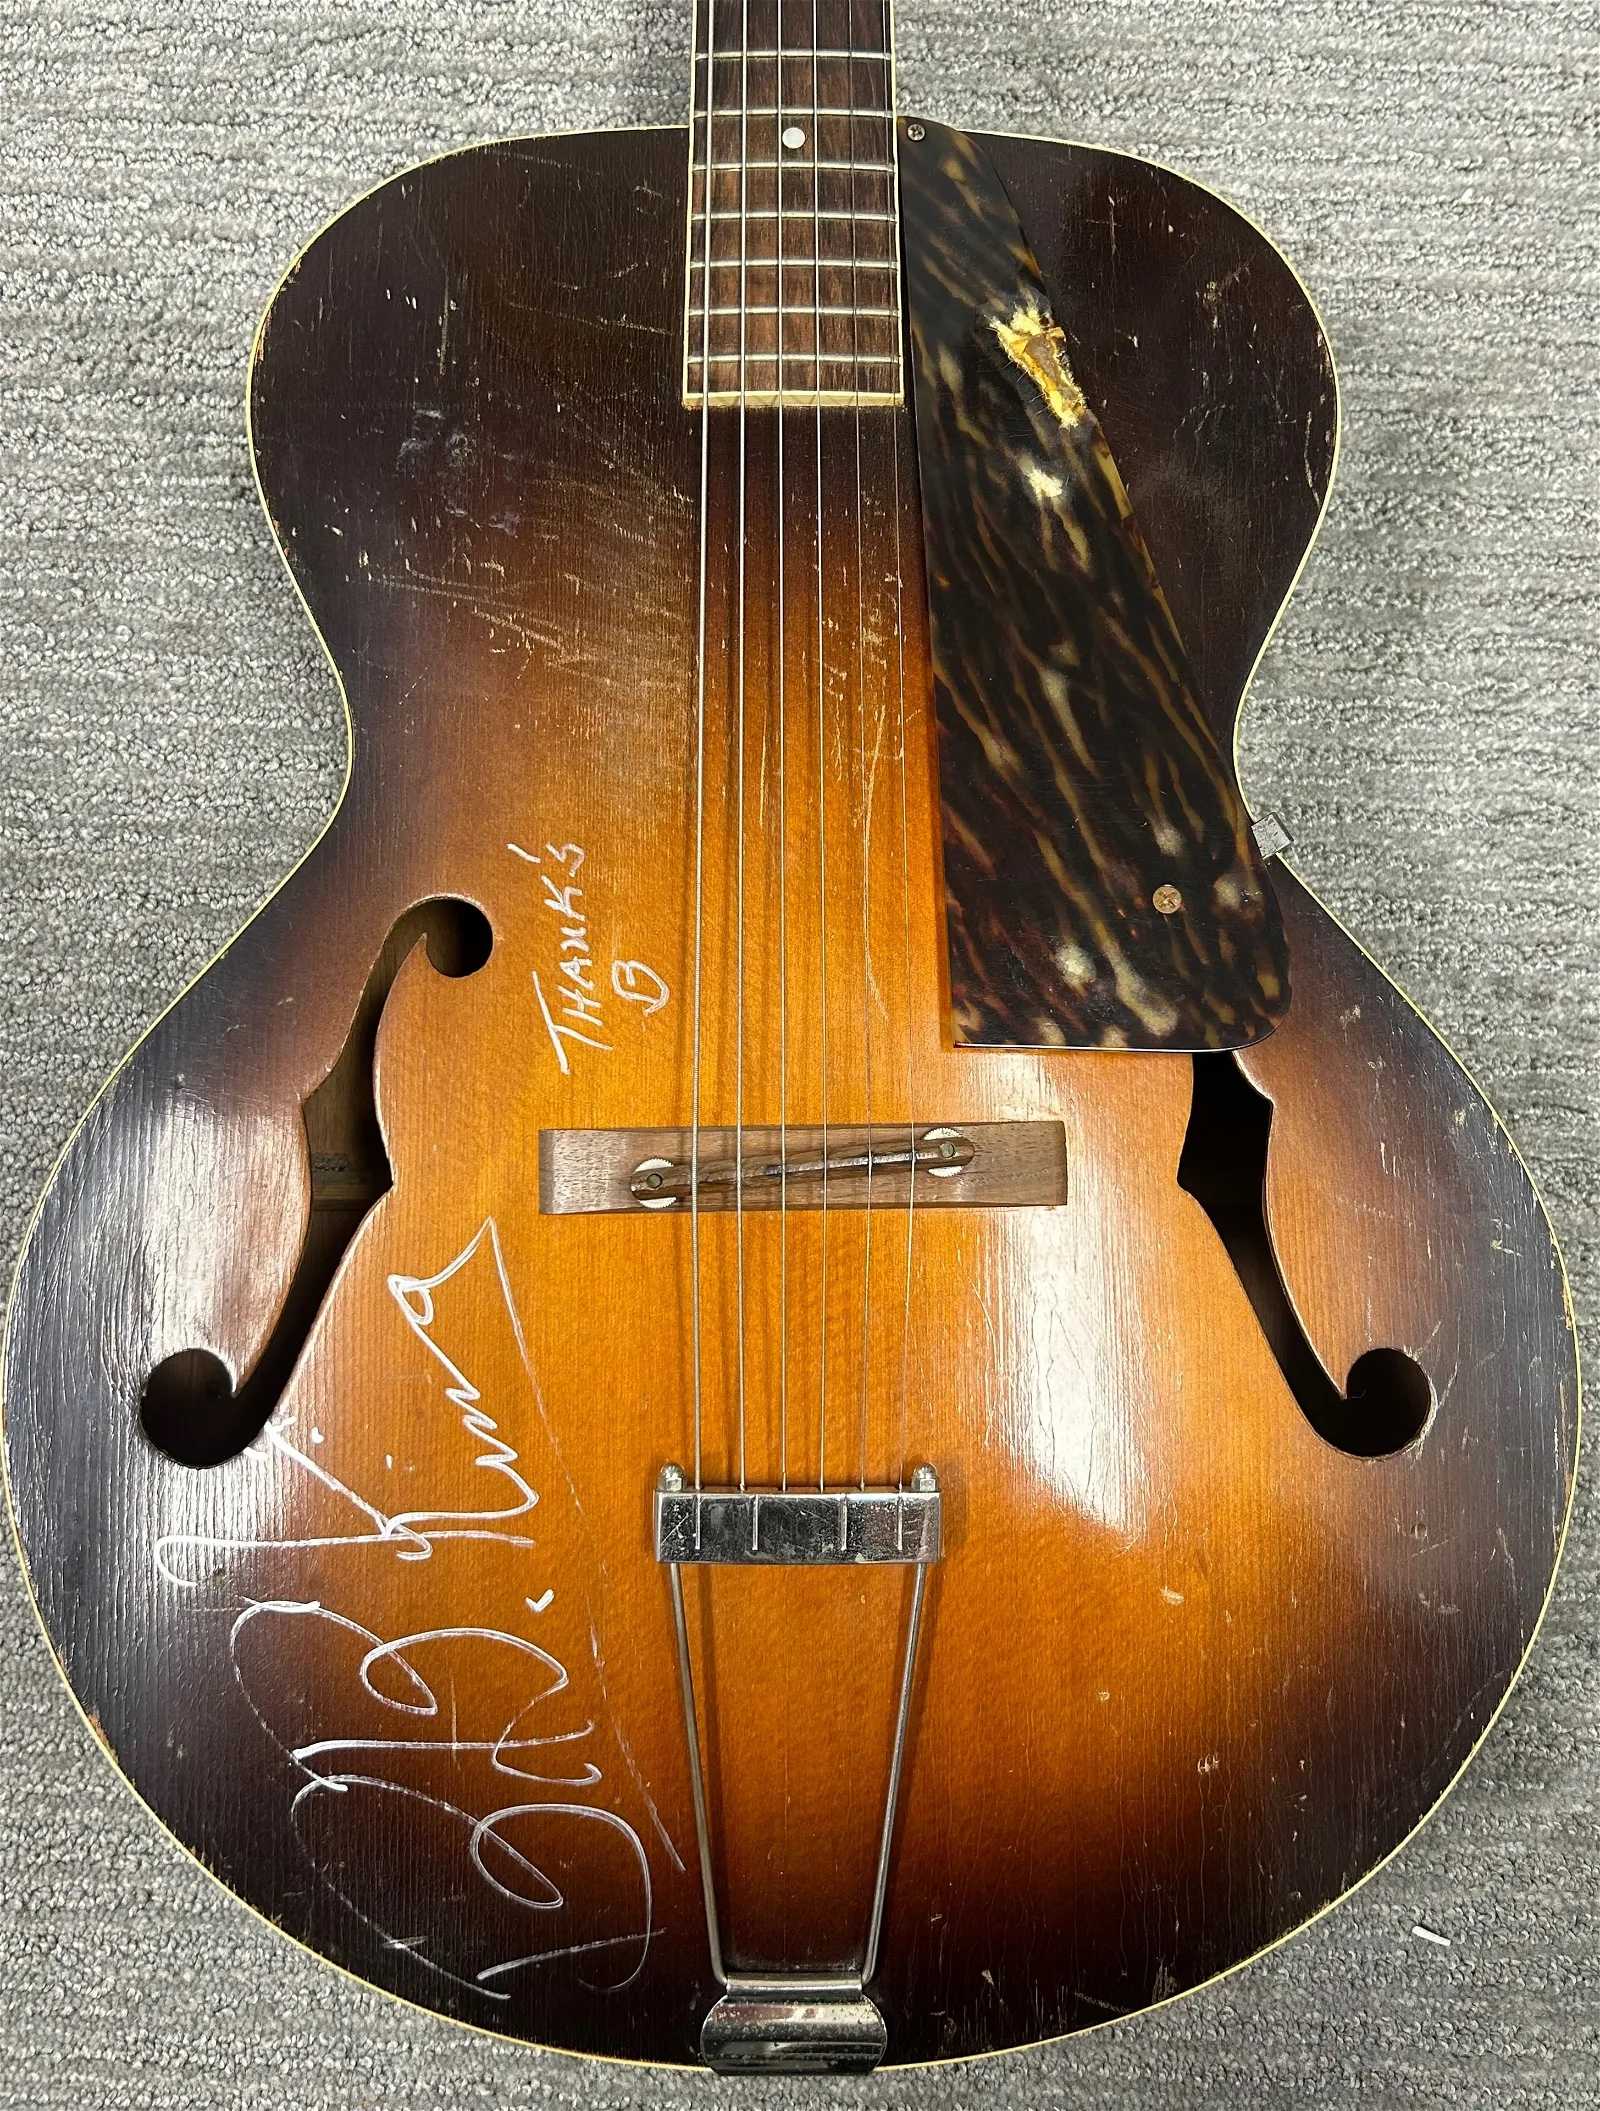 Signed guitar owned by BB King as a teenager, with provenance to the Las Vegas Hard Rock Café, estimated at $10,000-$20,000 at Piece of the Past.